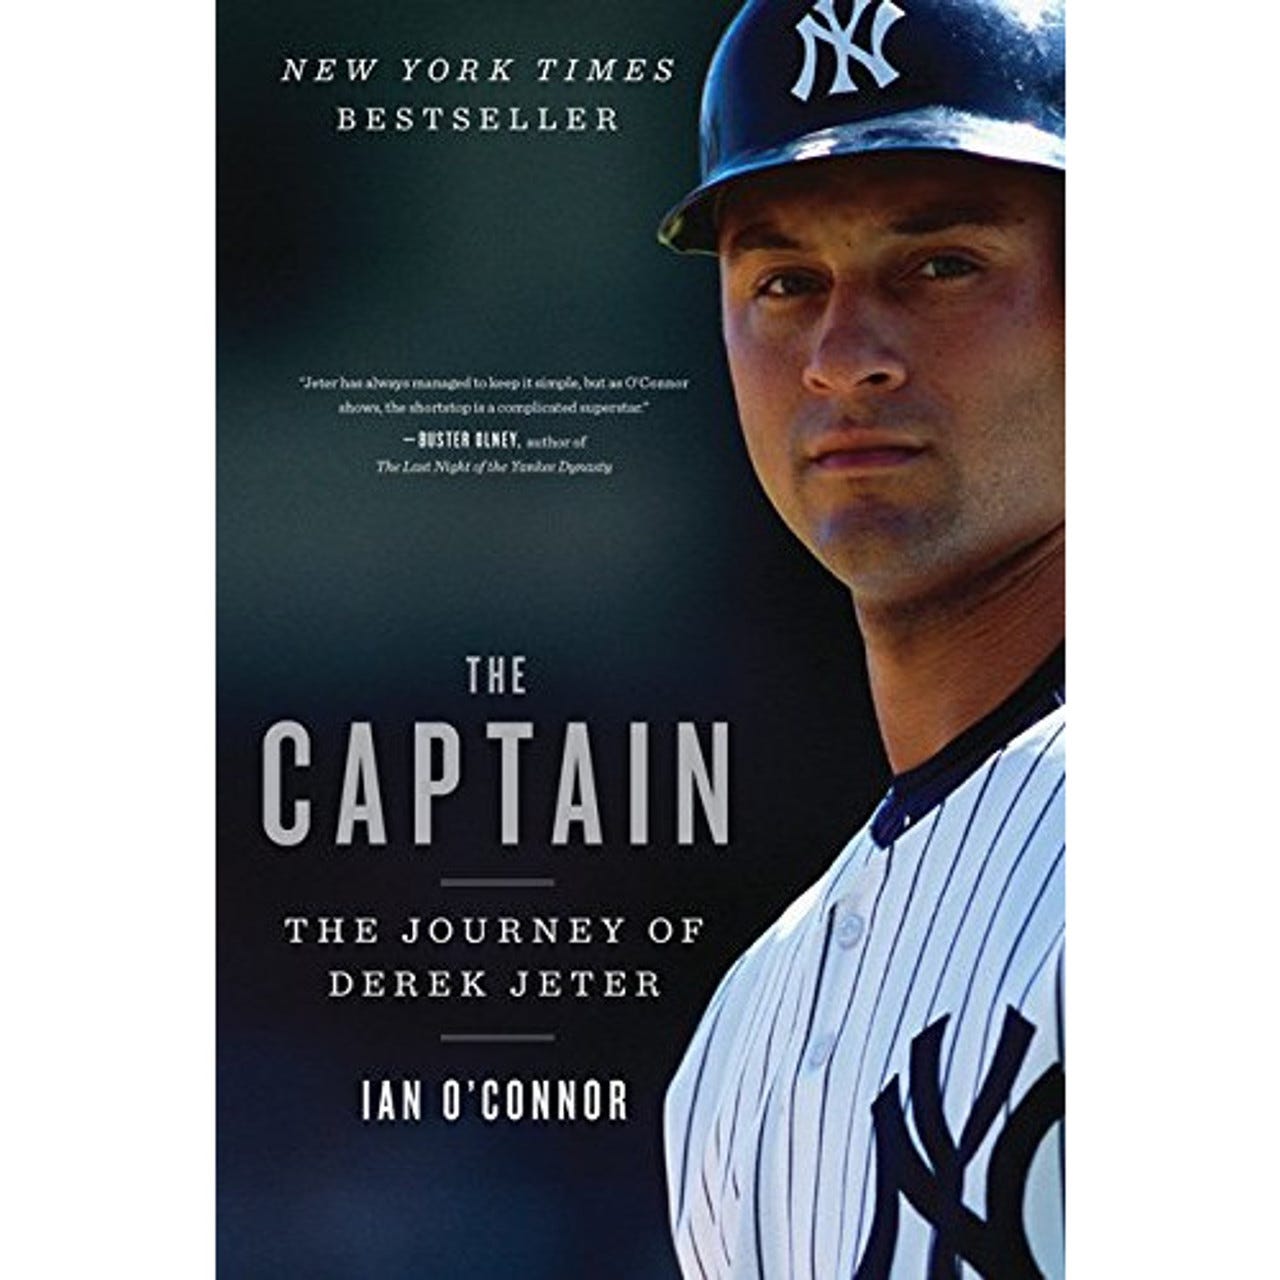 Cover for The Captain: The Journey of Derek Jeter by Ian O'Connor.